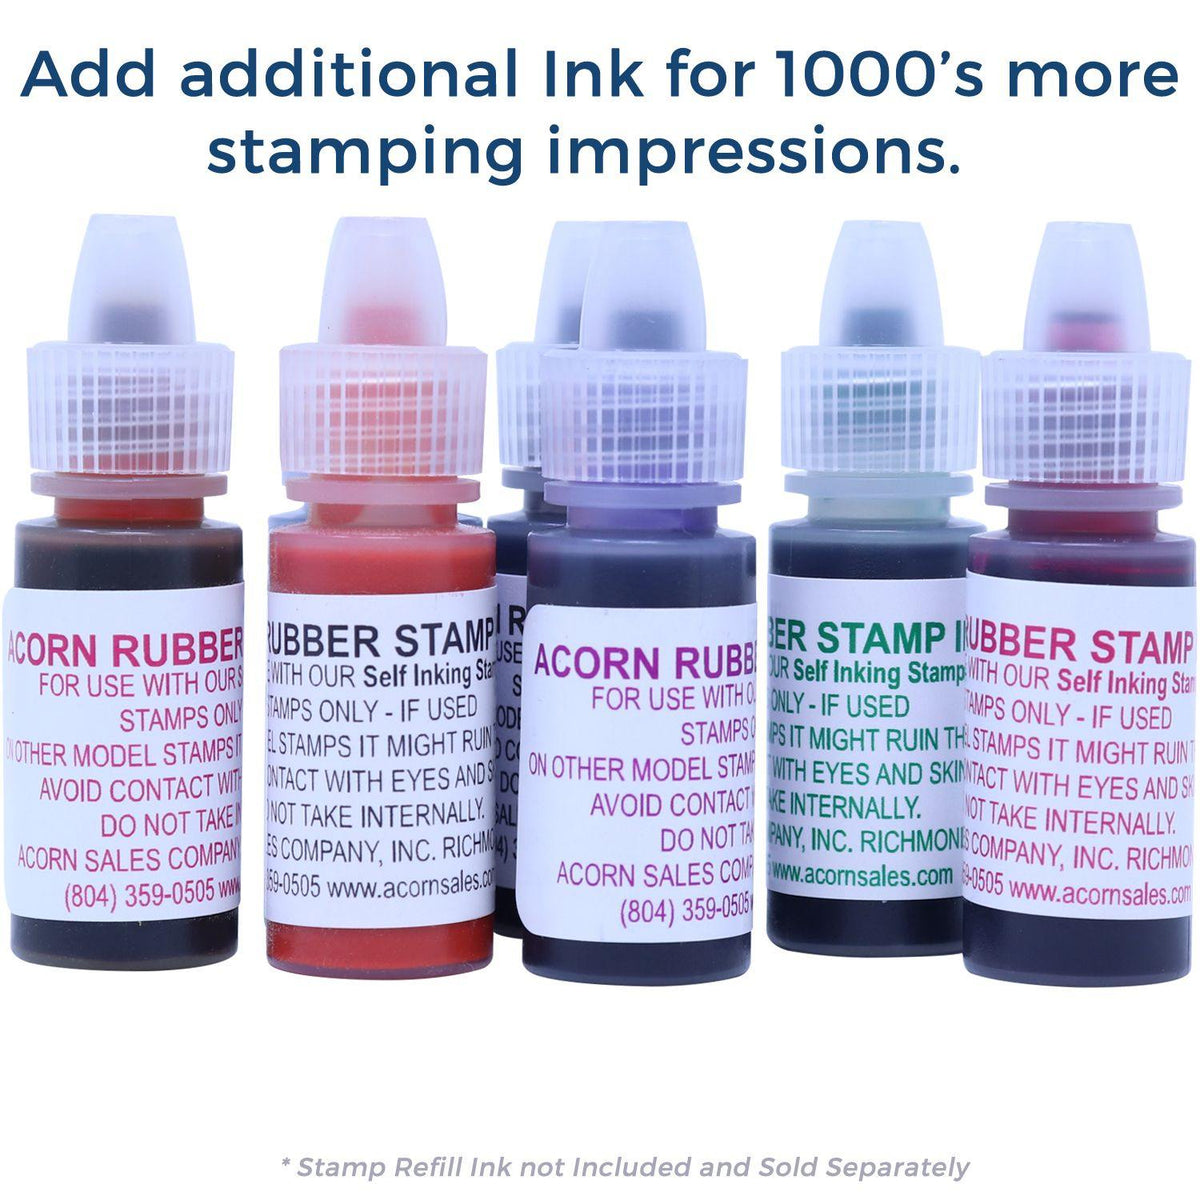 Refill Inks for Large Pre-Inked Faxed with Line Stamp Available